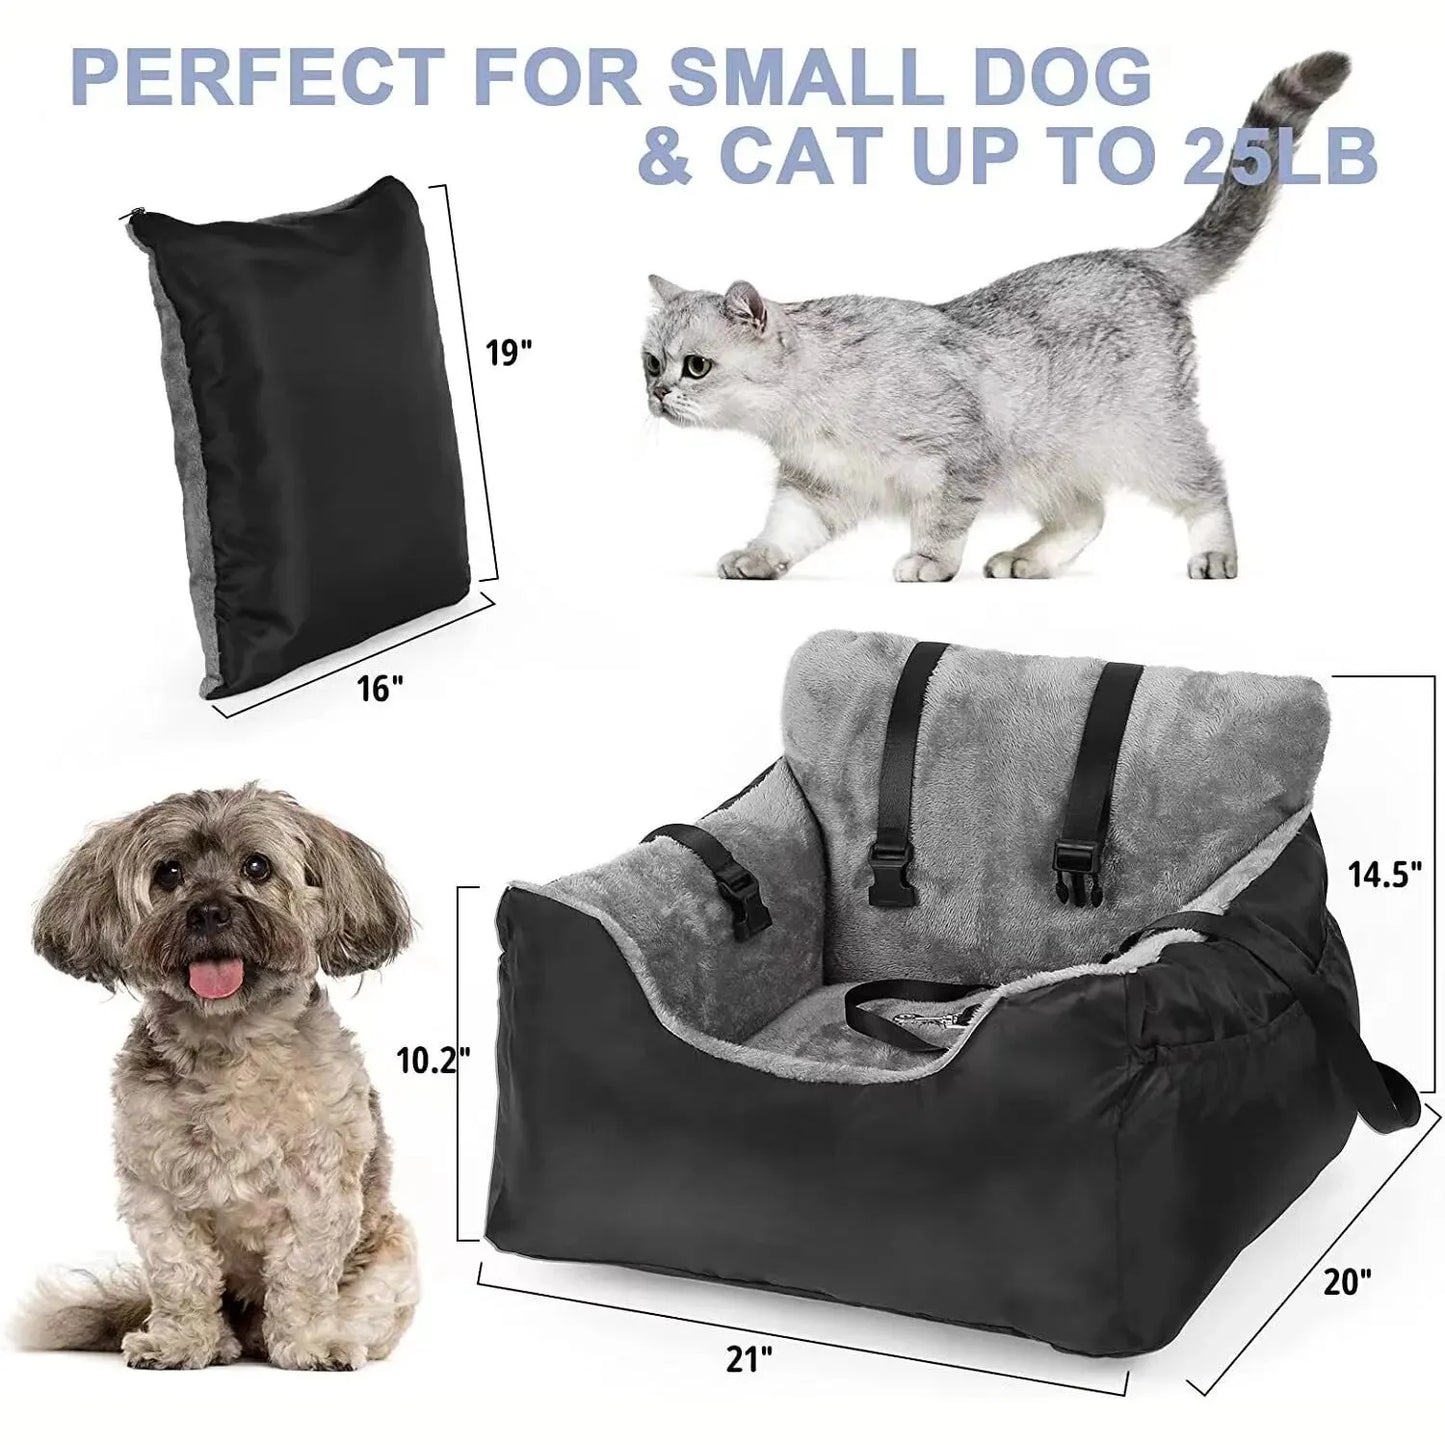 Washable Dog Car Seat Carrier Bed